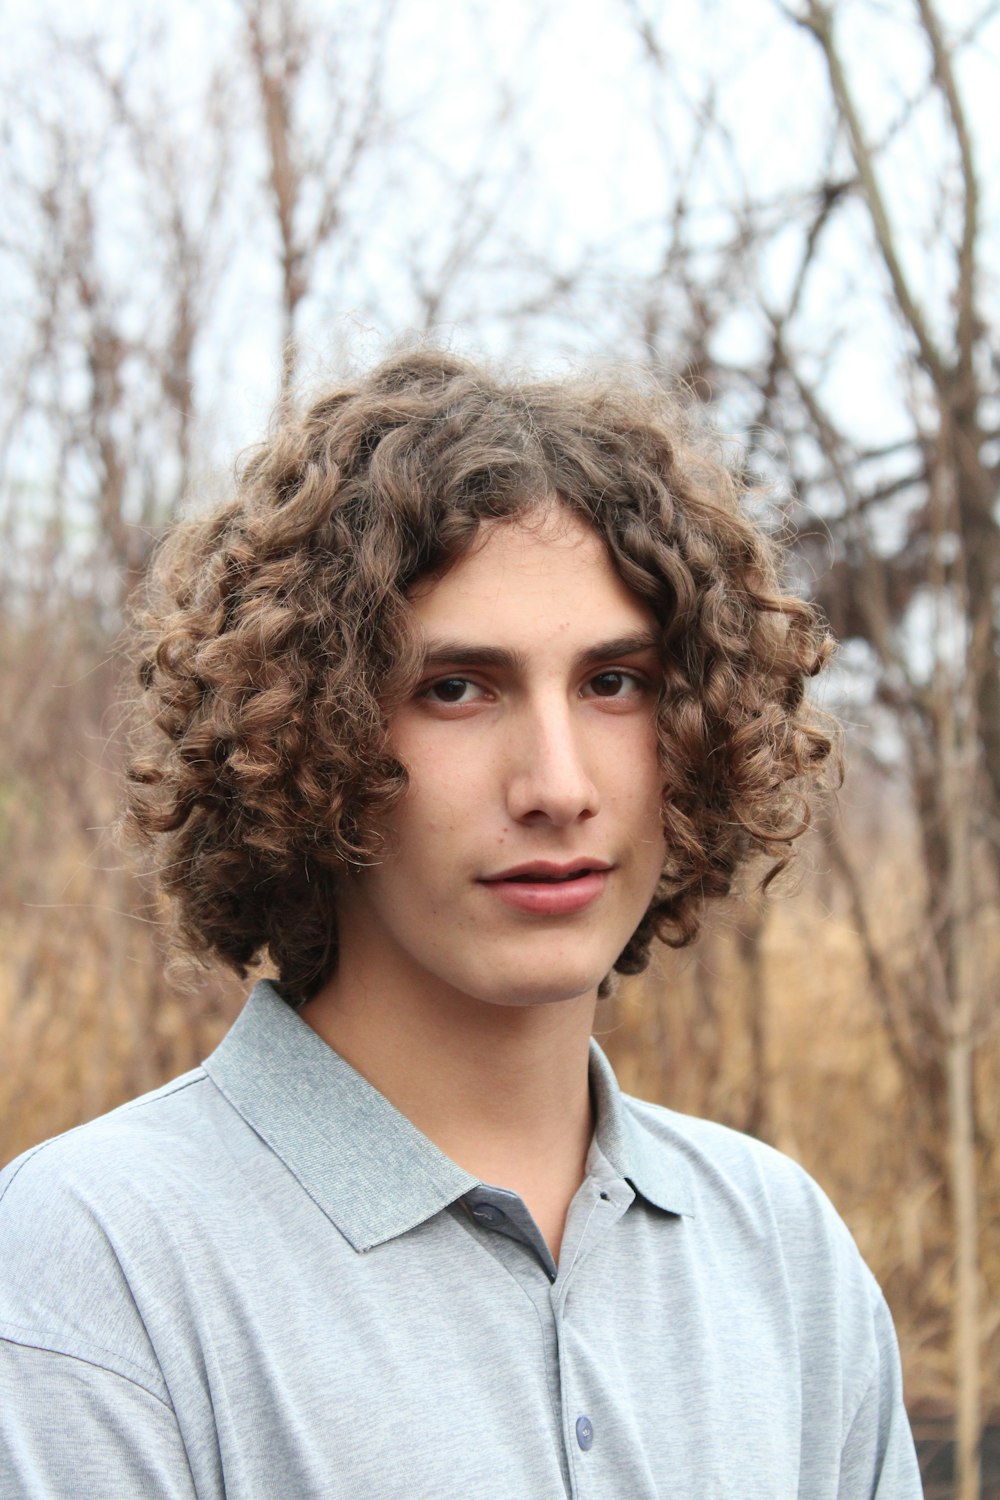 a young man with curly hair standing in front of trees